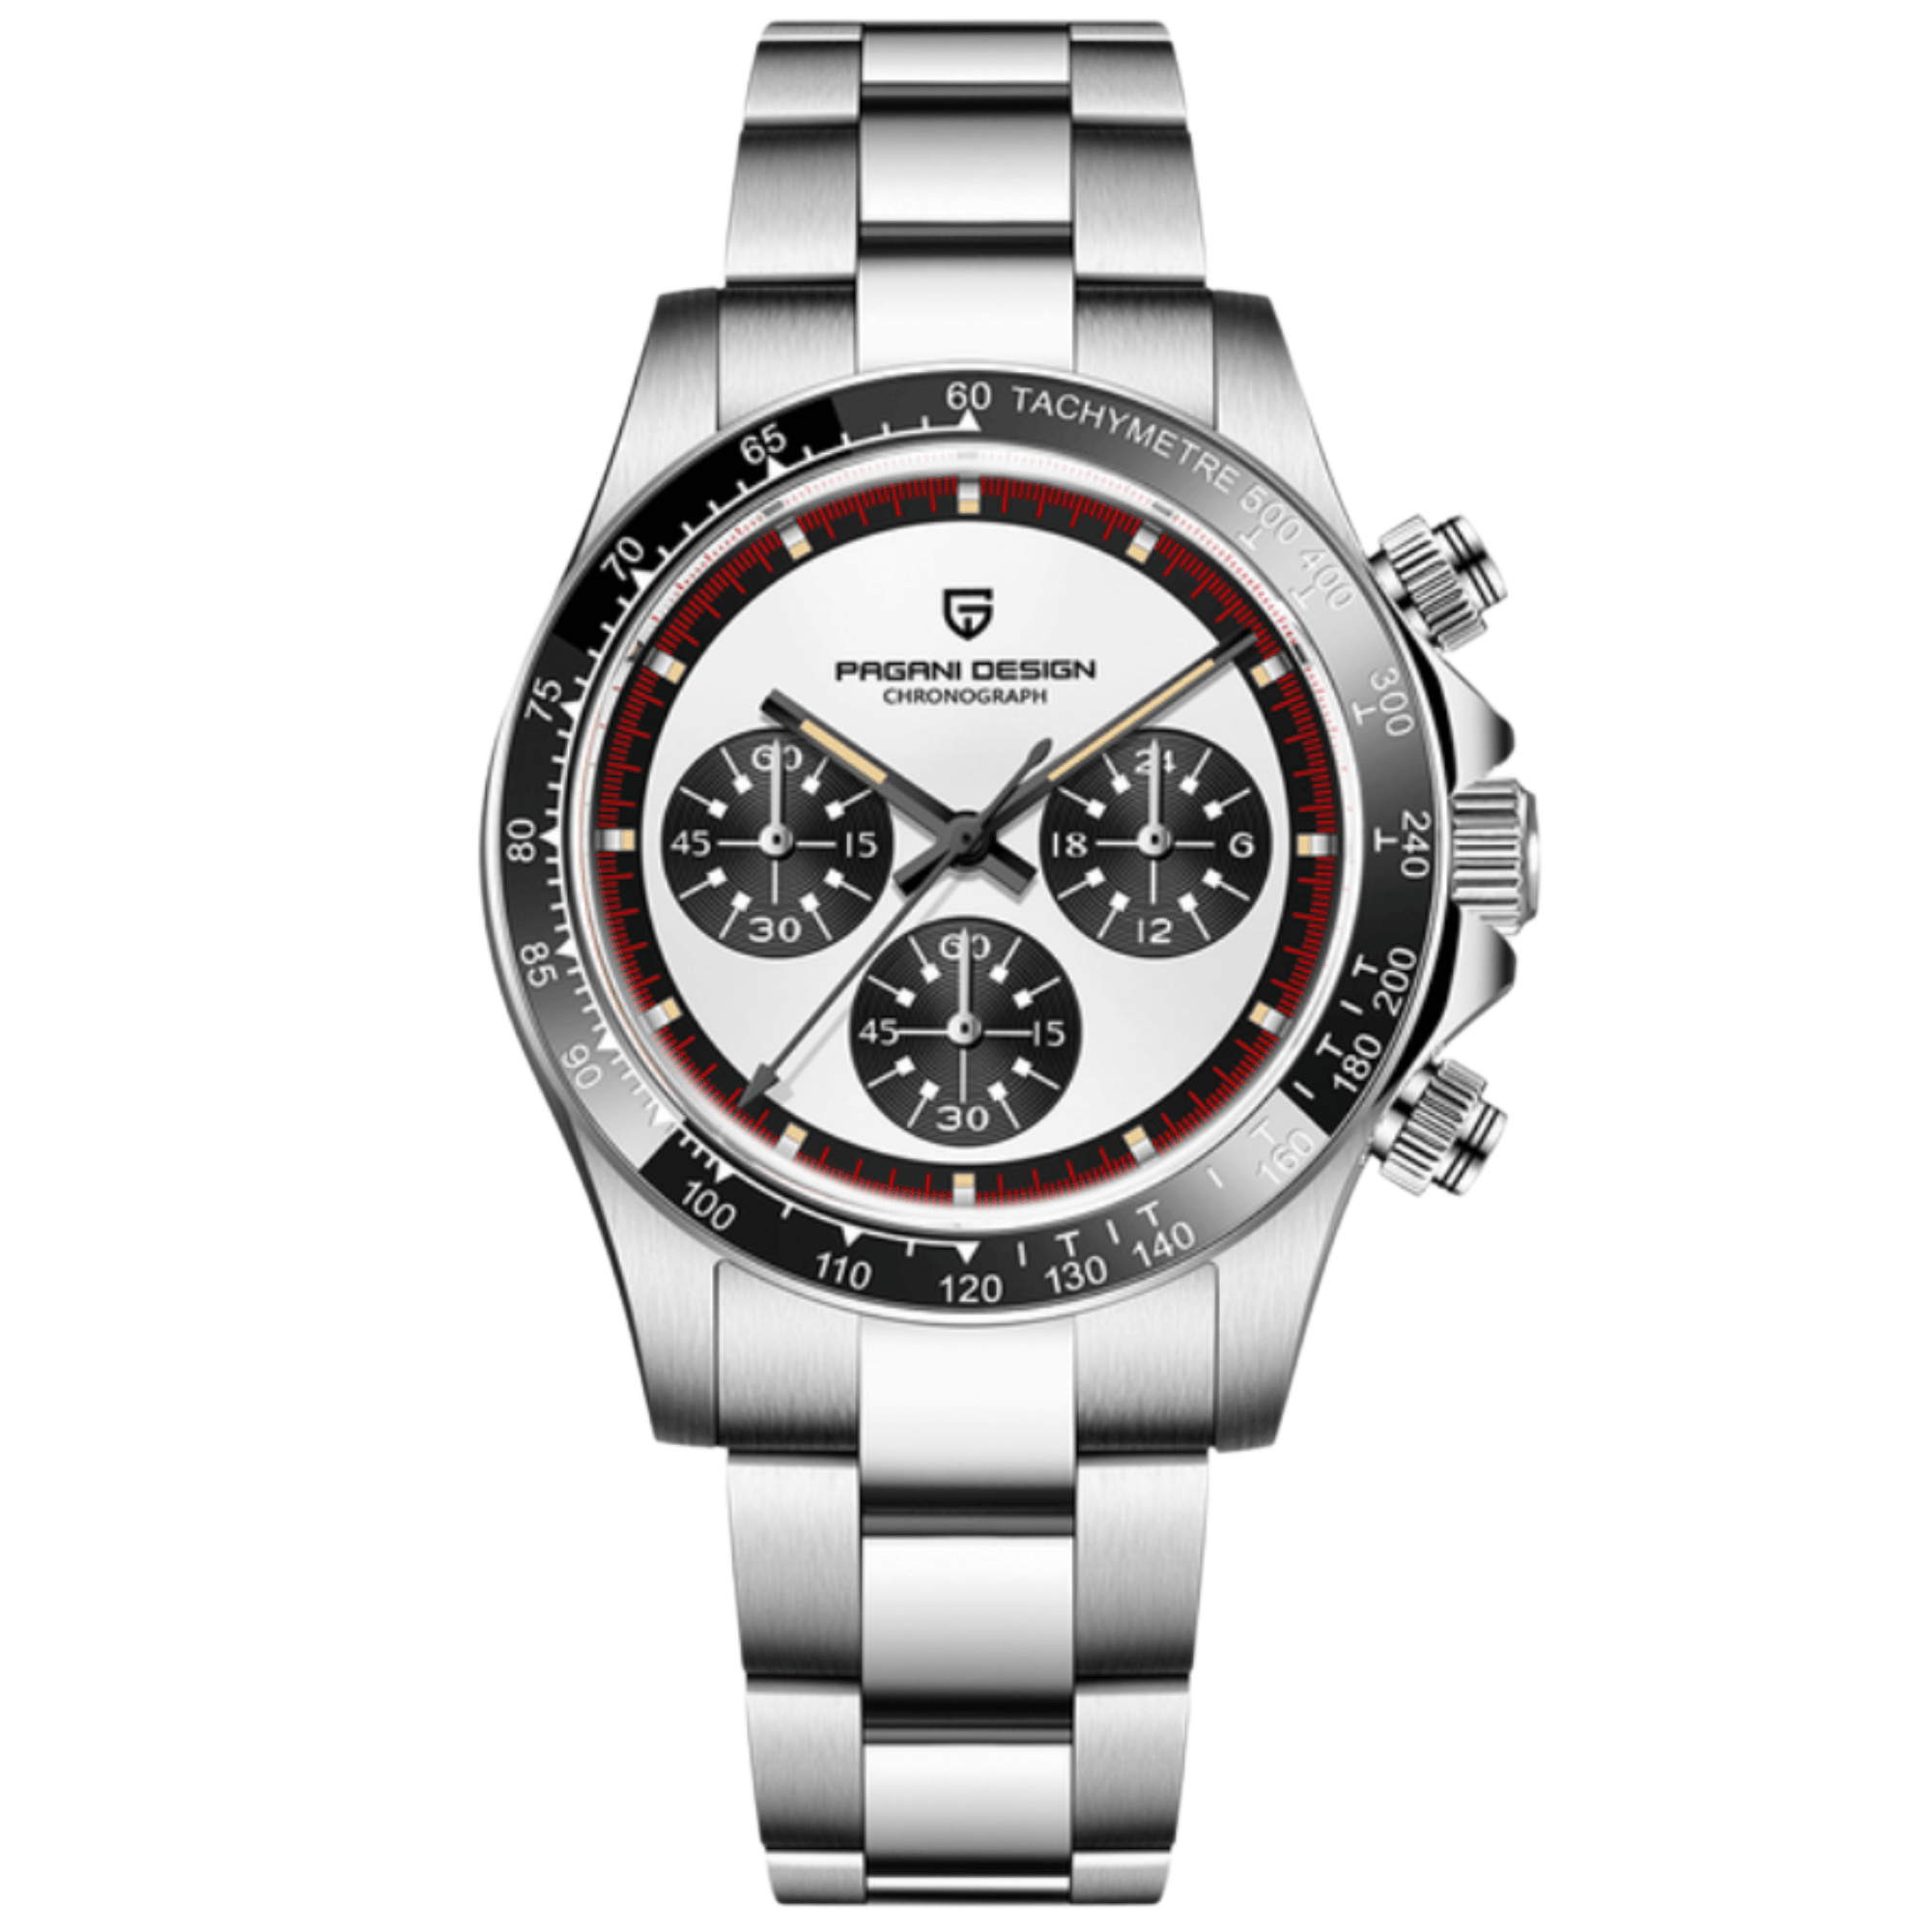 Pagani Design PD-1644 Paul Newman Chronograph Luxury Waterproof Movement Japanese VK63 | Stainless Steel Men's 40MM Watch - White Dial